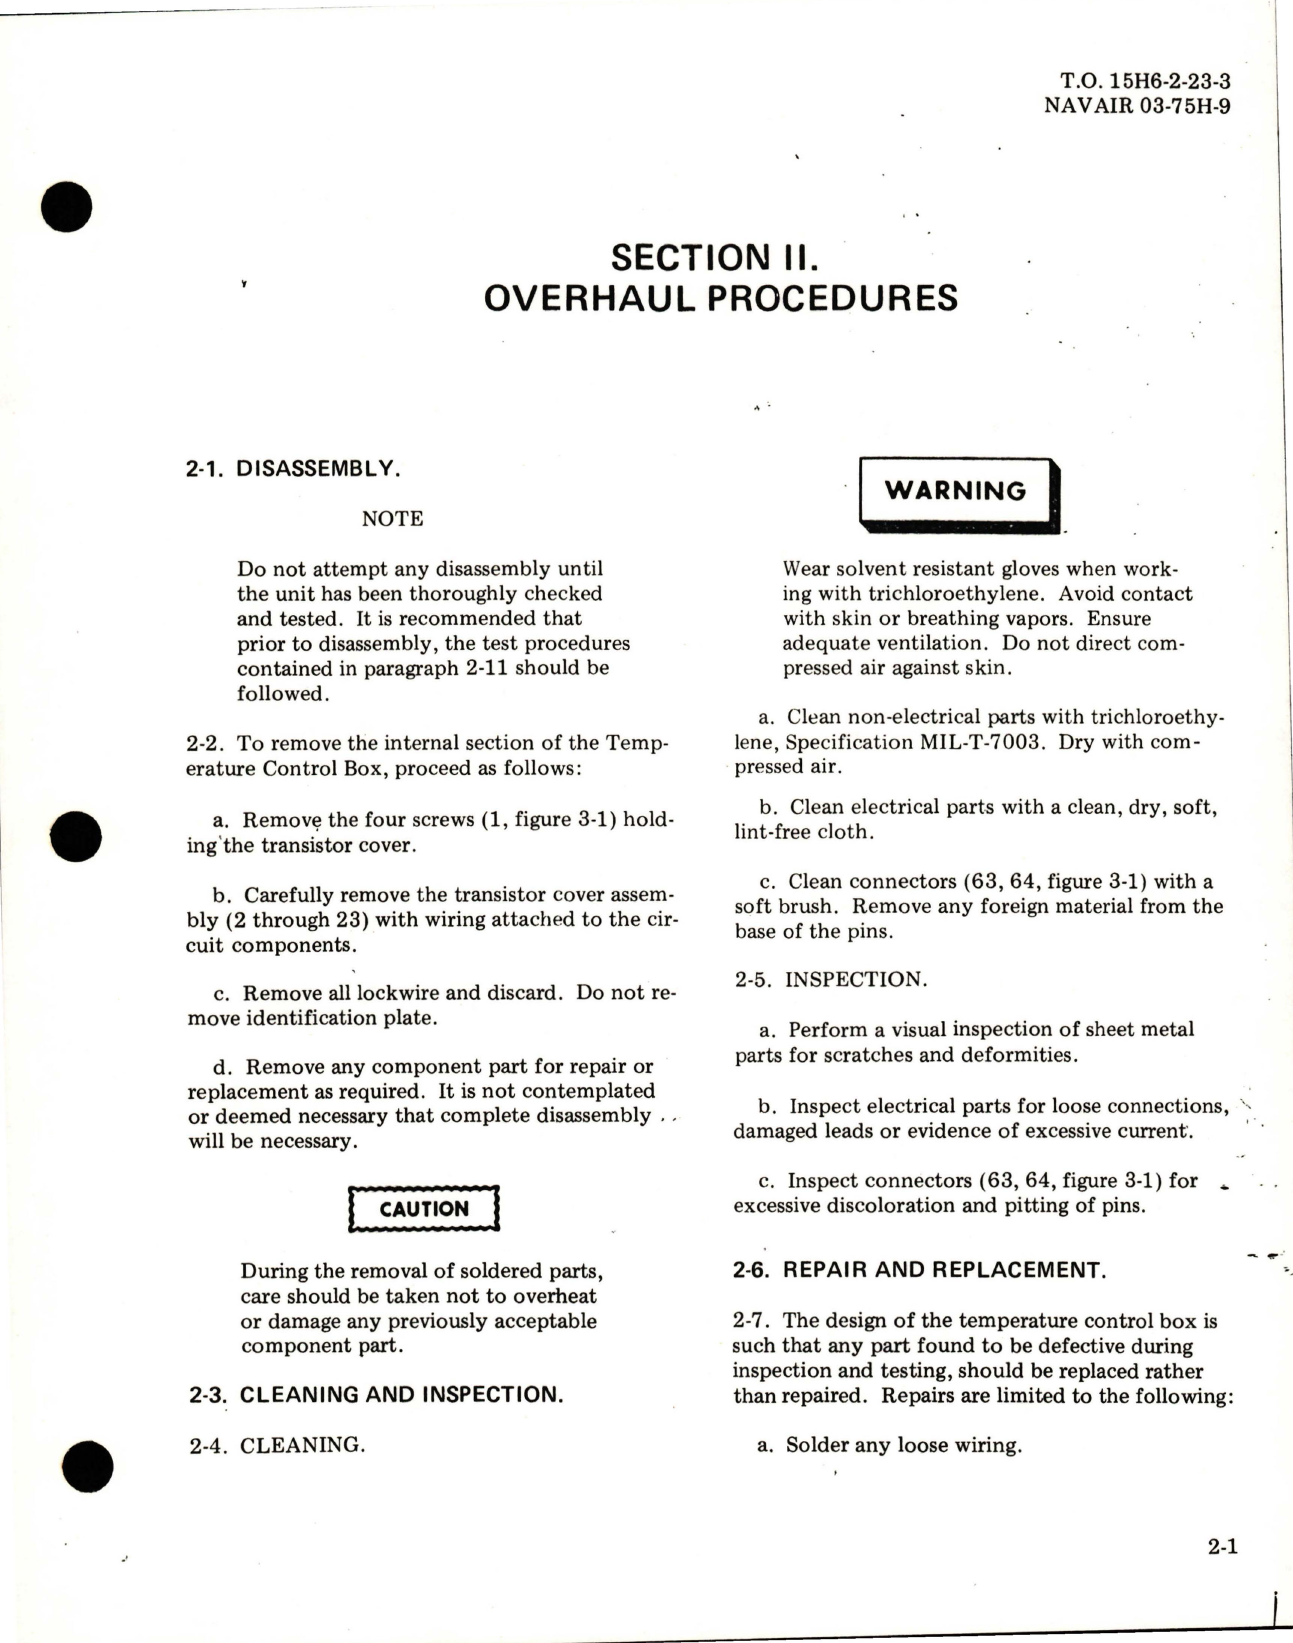 Sample page 7 from AirCorps Library document: Overhaul Instructions with Illustrated Parts Breakdown for Temperature Control Box - Parts 25430135-08, 25430135-09